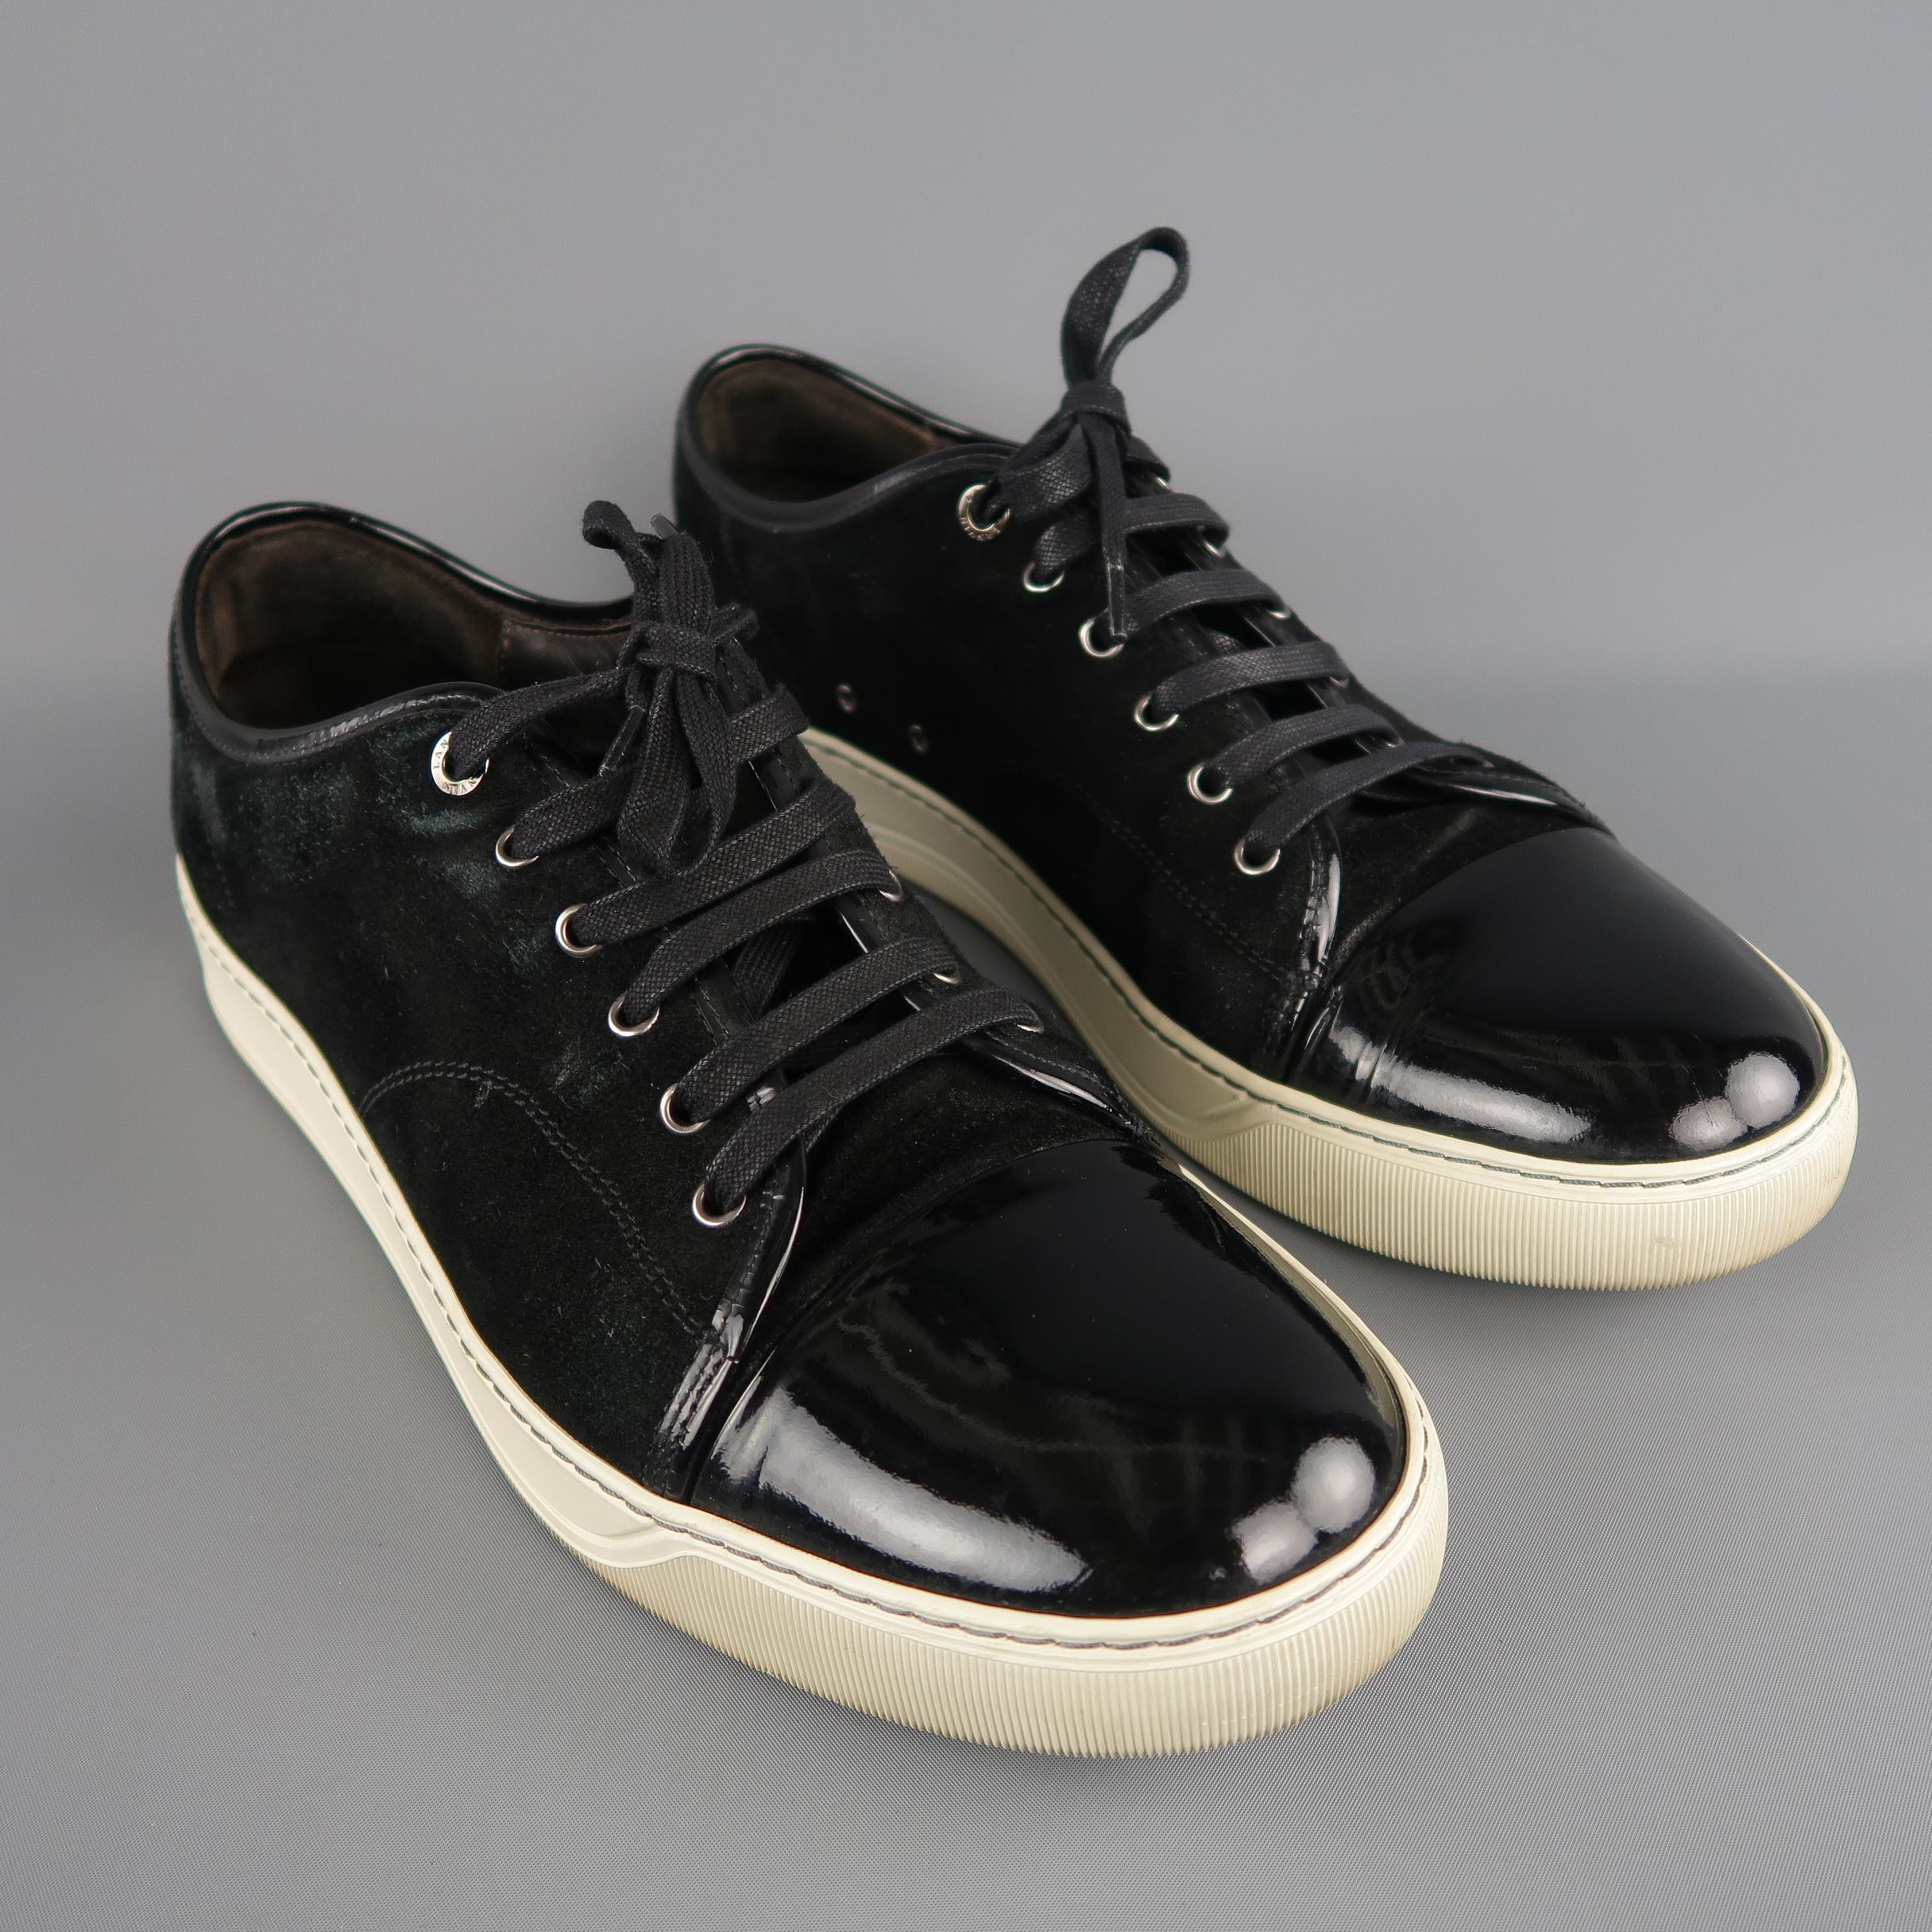 LANVIN soft black suede low-top sneakers are styled with a patent leather cap toe. As-Is. Made in Portugal.
 
Very good Pre-Owned Condition.
Marked: Lanvin UK 12
 
Outsole: 13 x 3 in.  